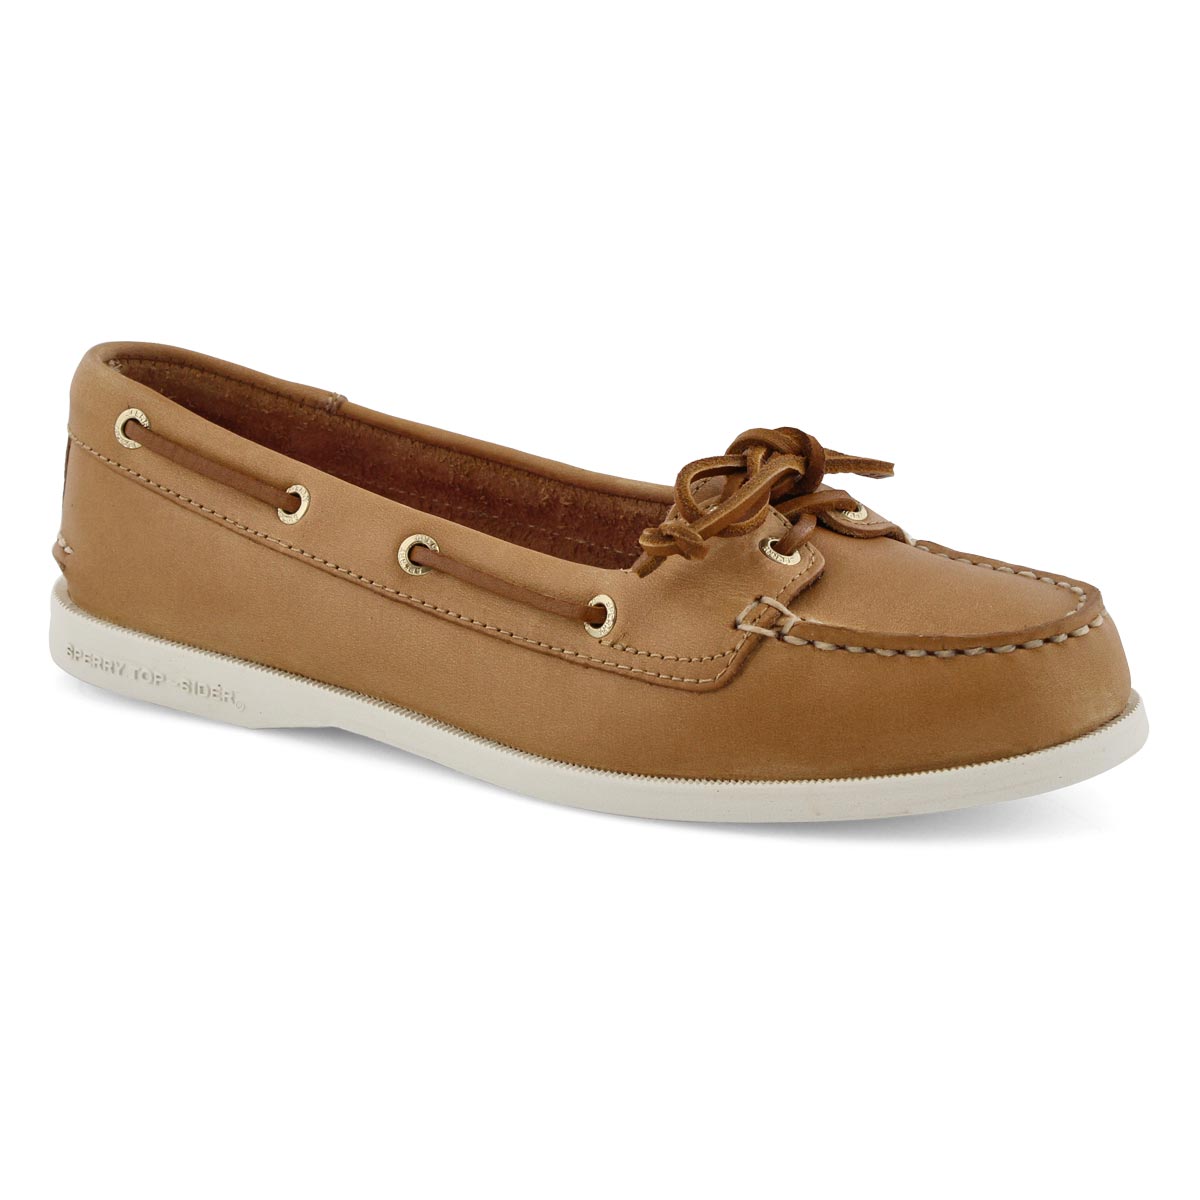 sperry womens shoes